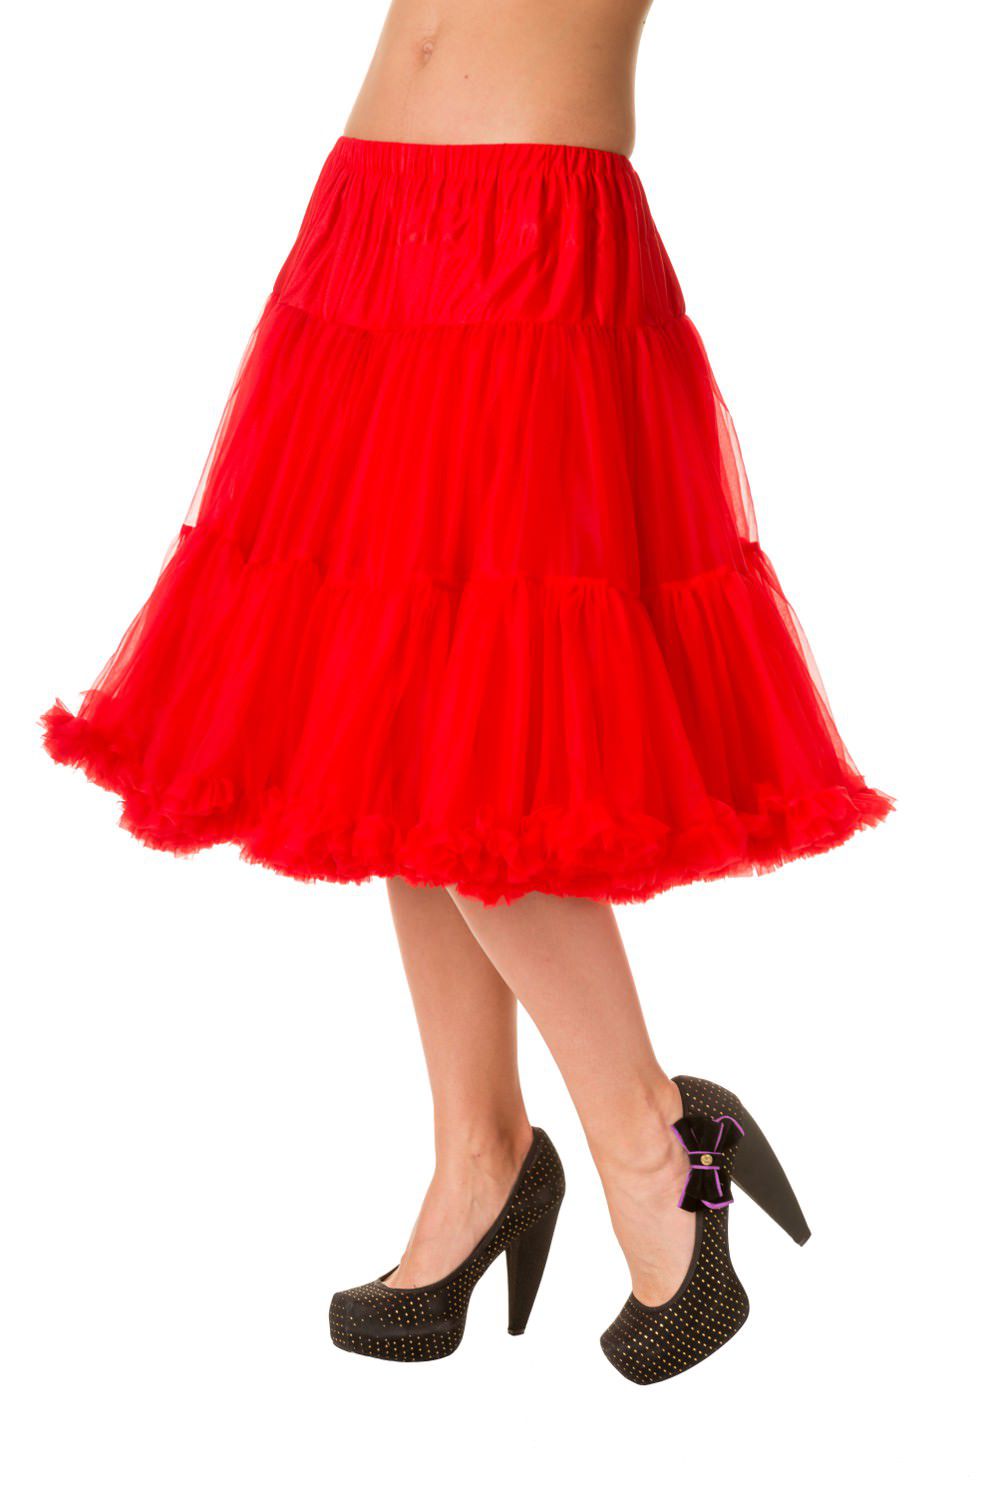 BNSBN235RED_jupon-jupe-rockabilly-pin-up-50-s-retro-starlite-60cm-rouge